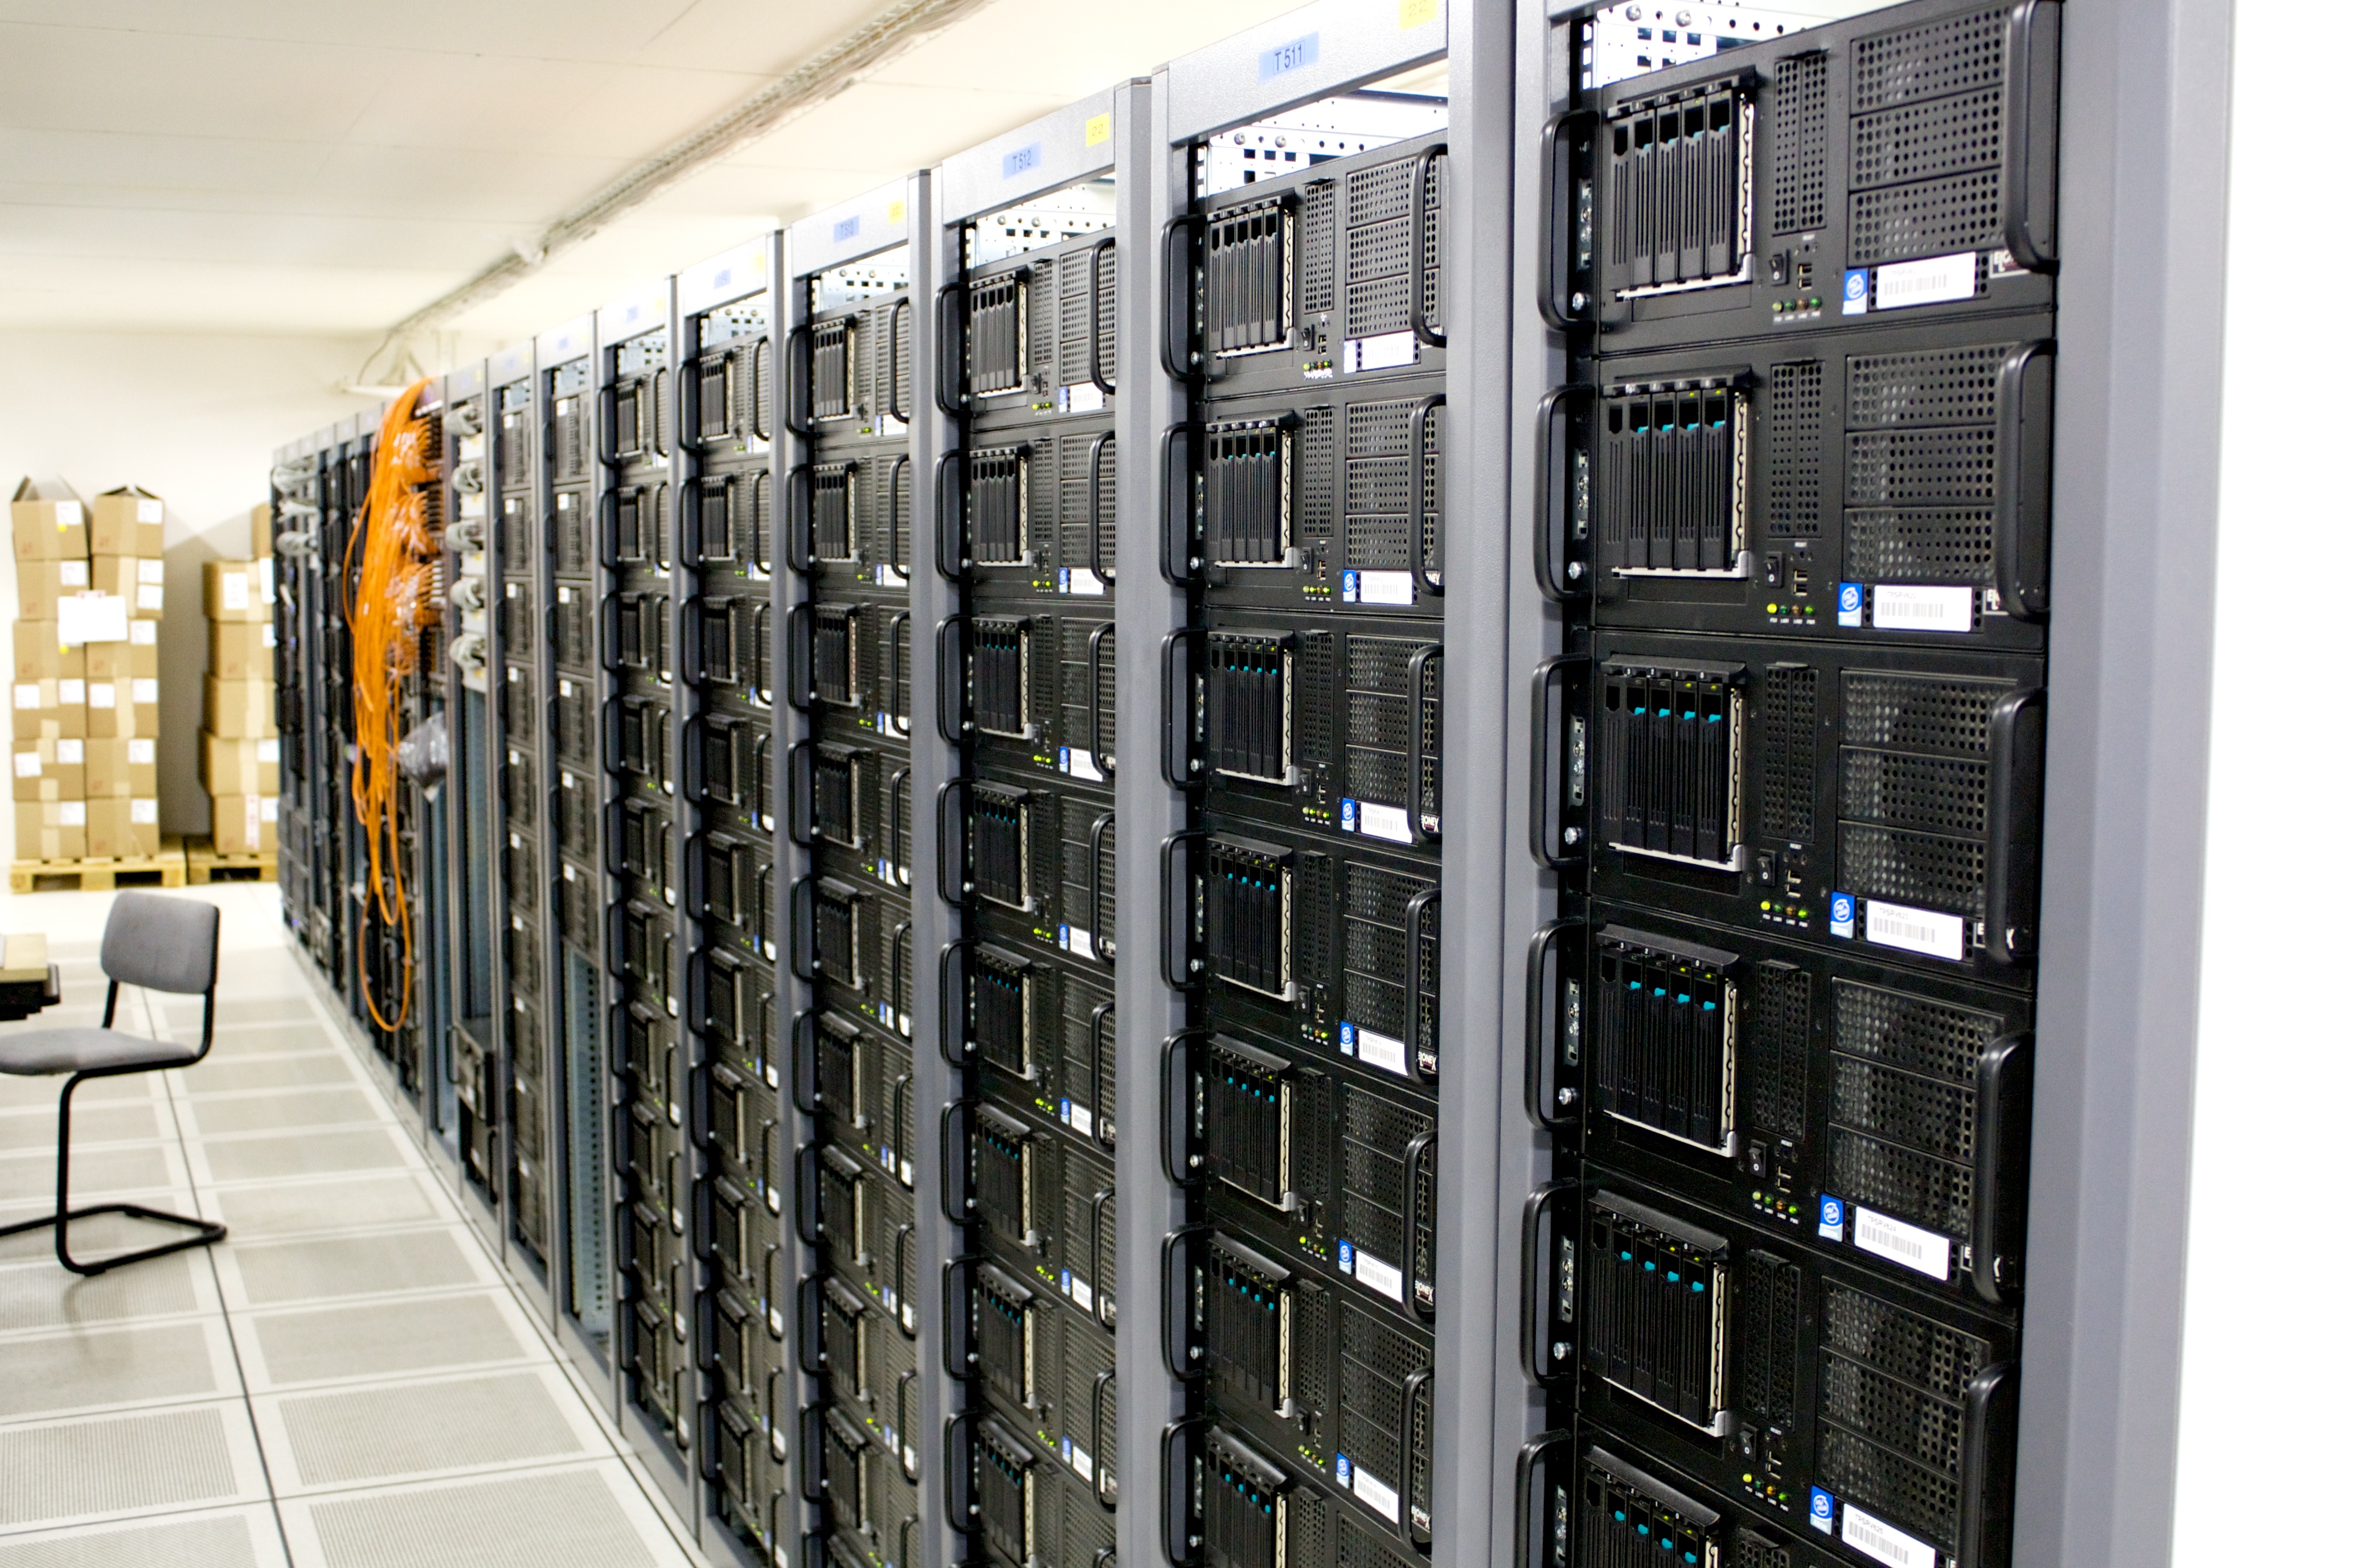 Have numerous servers or a massive network you need managed?